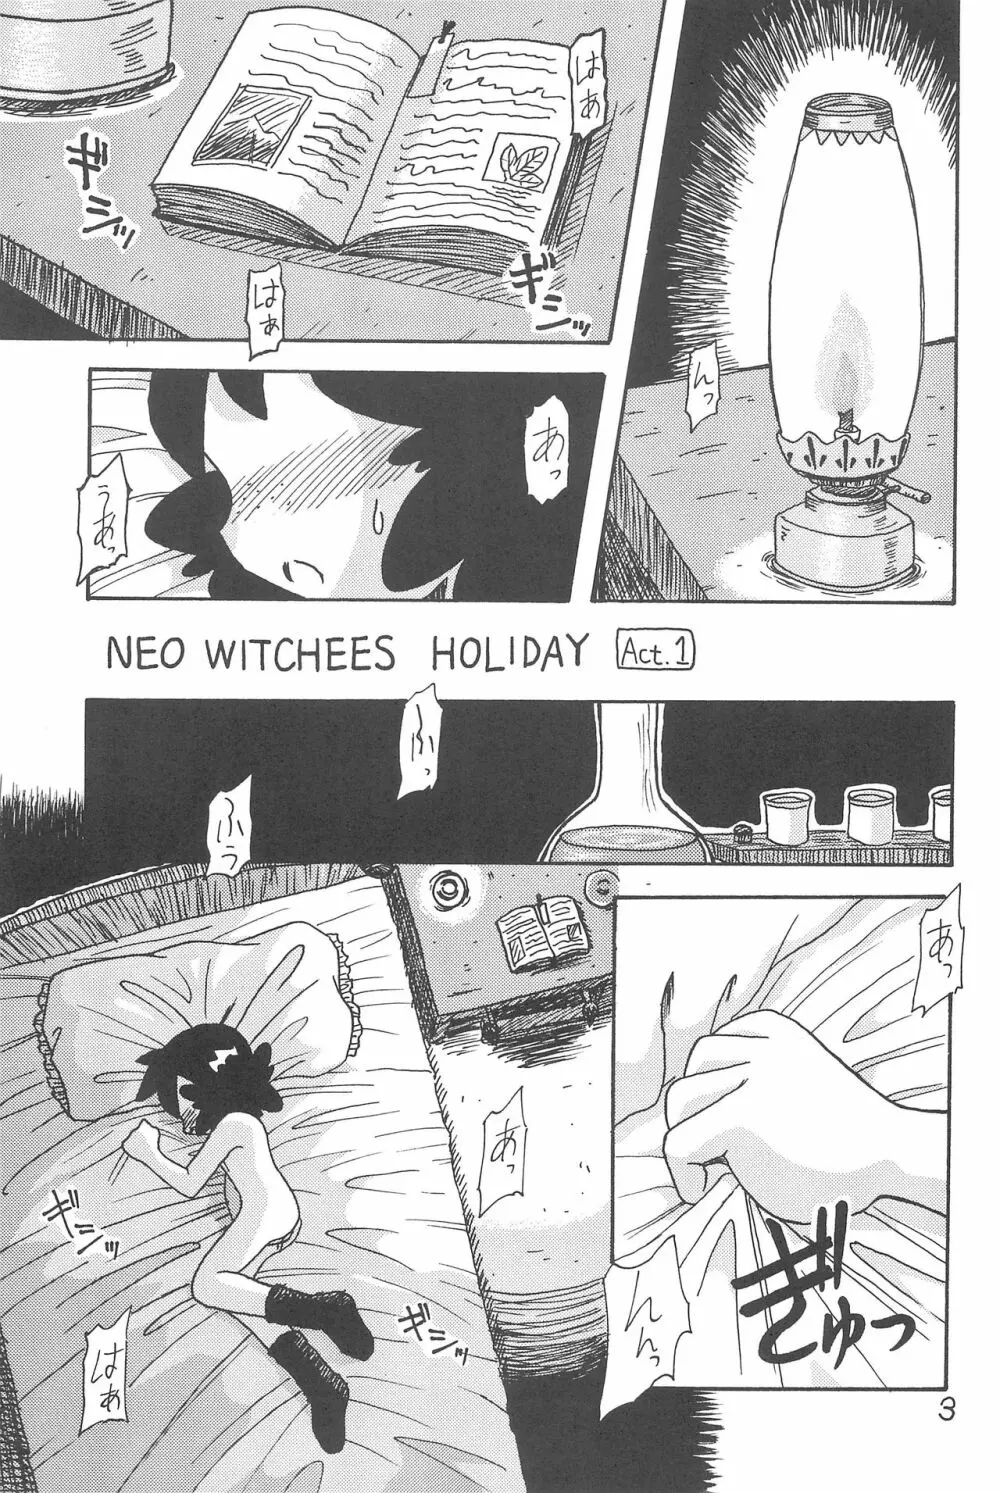 NEO WITCHEES HOLIDAY Page.5